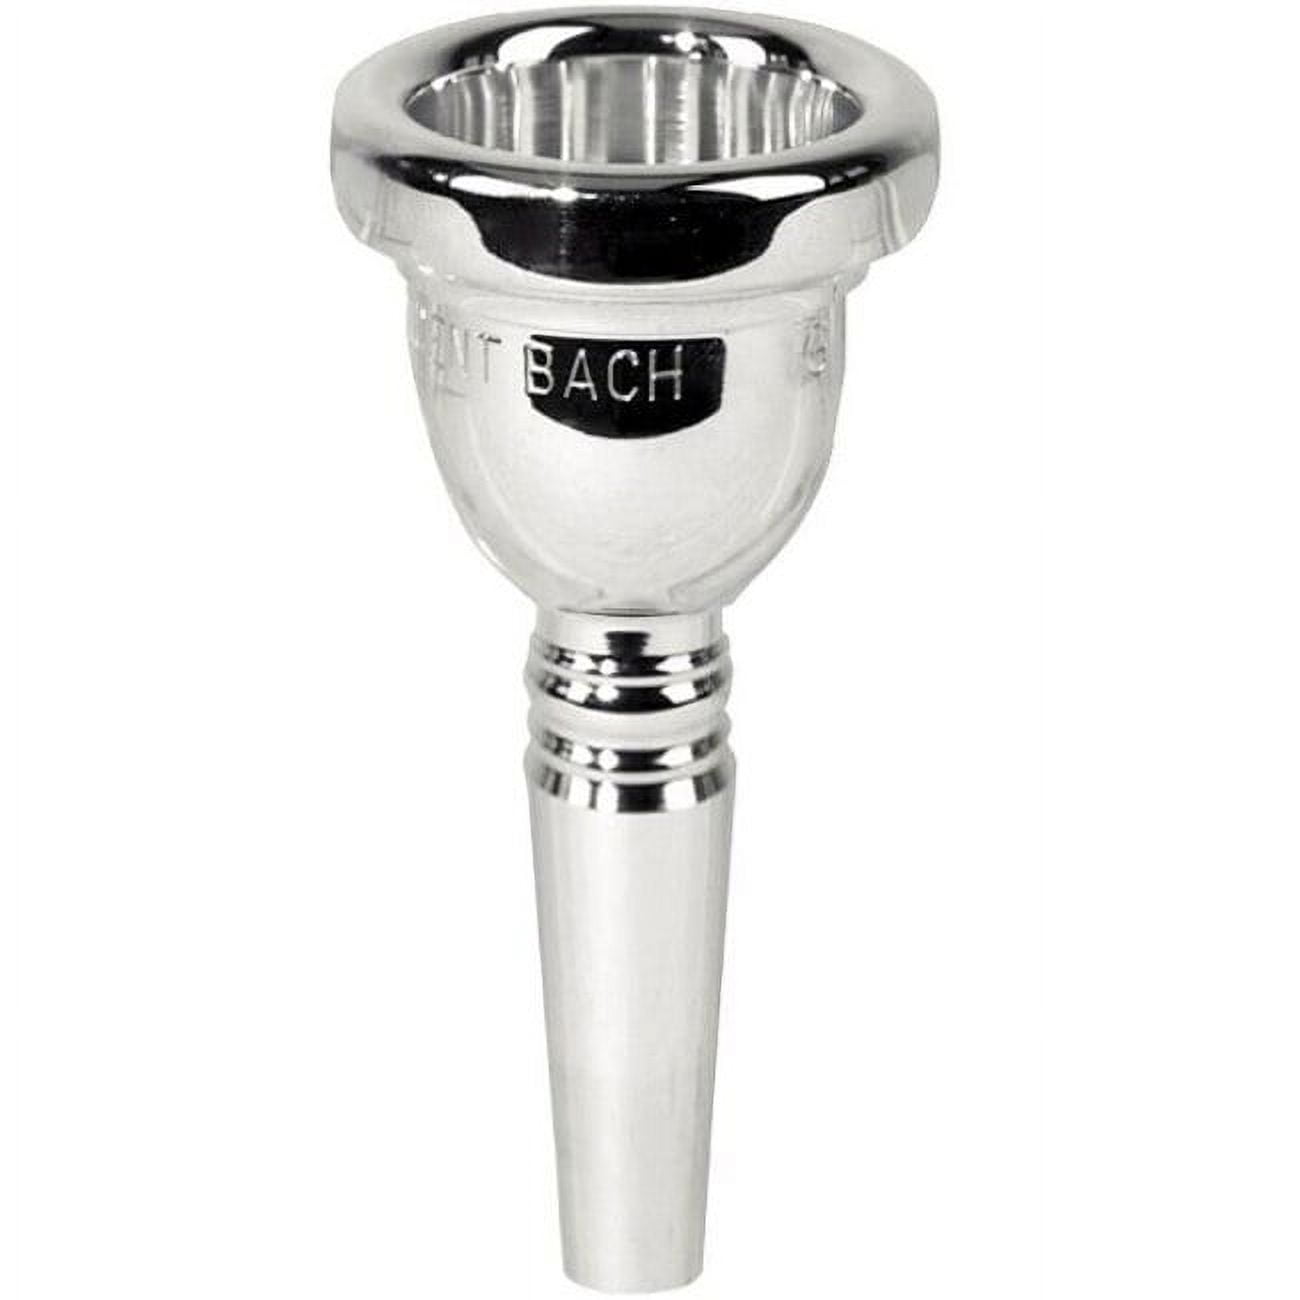 Buy Bach Tuba Mouthpiece (Various Cup Sizes)